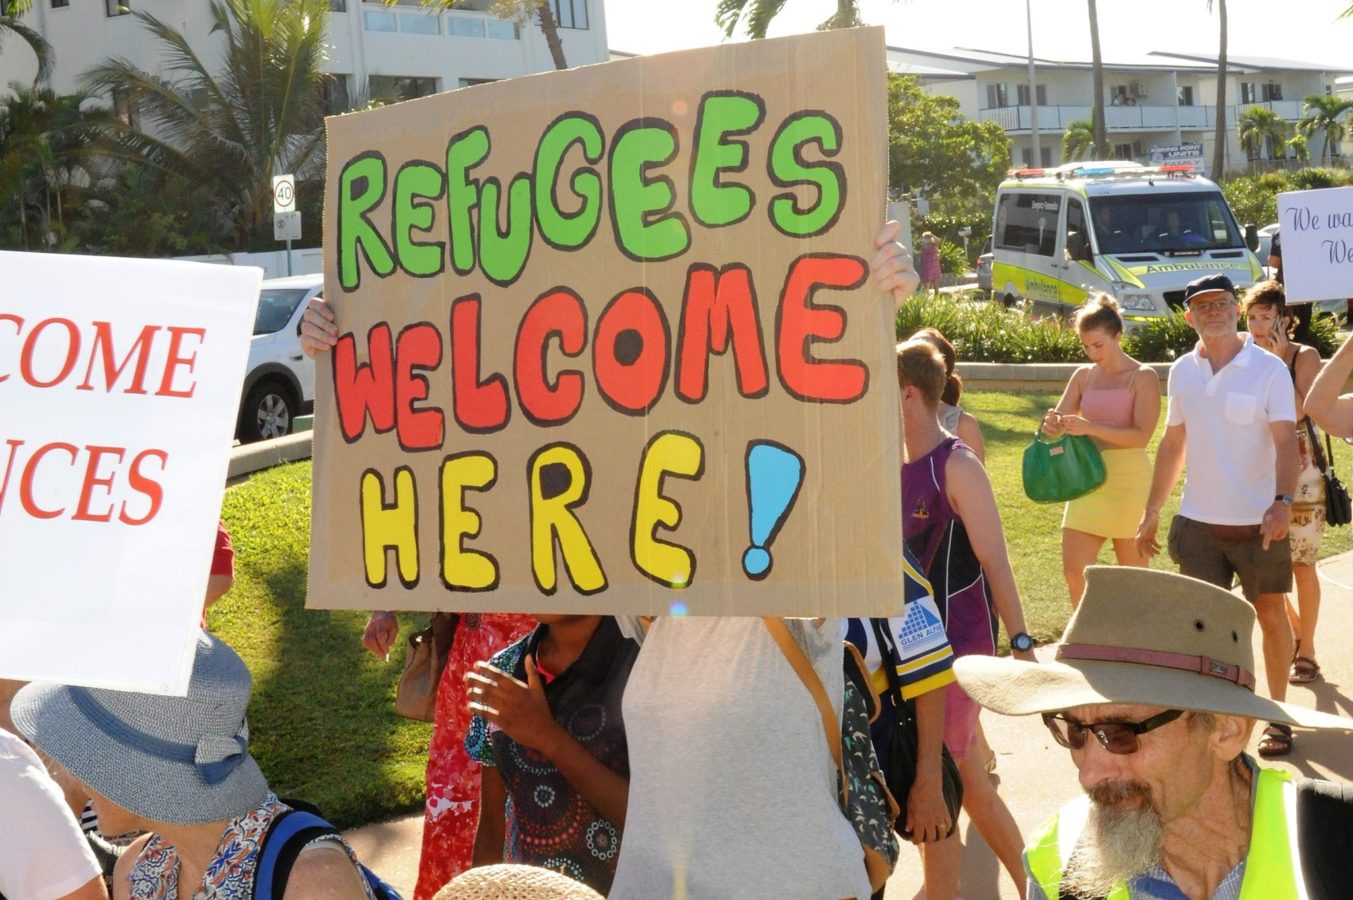 Homemade banner from the Palm Sunday refugee rally in Townsville. Colourful cardboard banner states 'Refugees welcome here'.